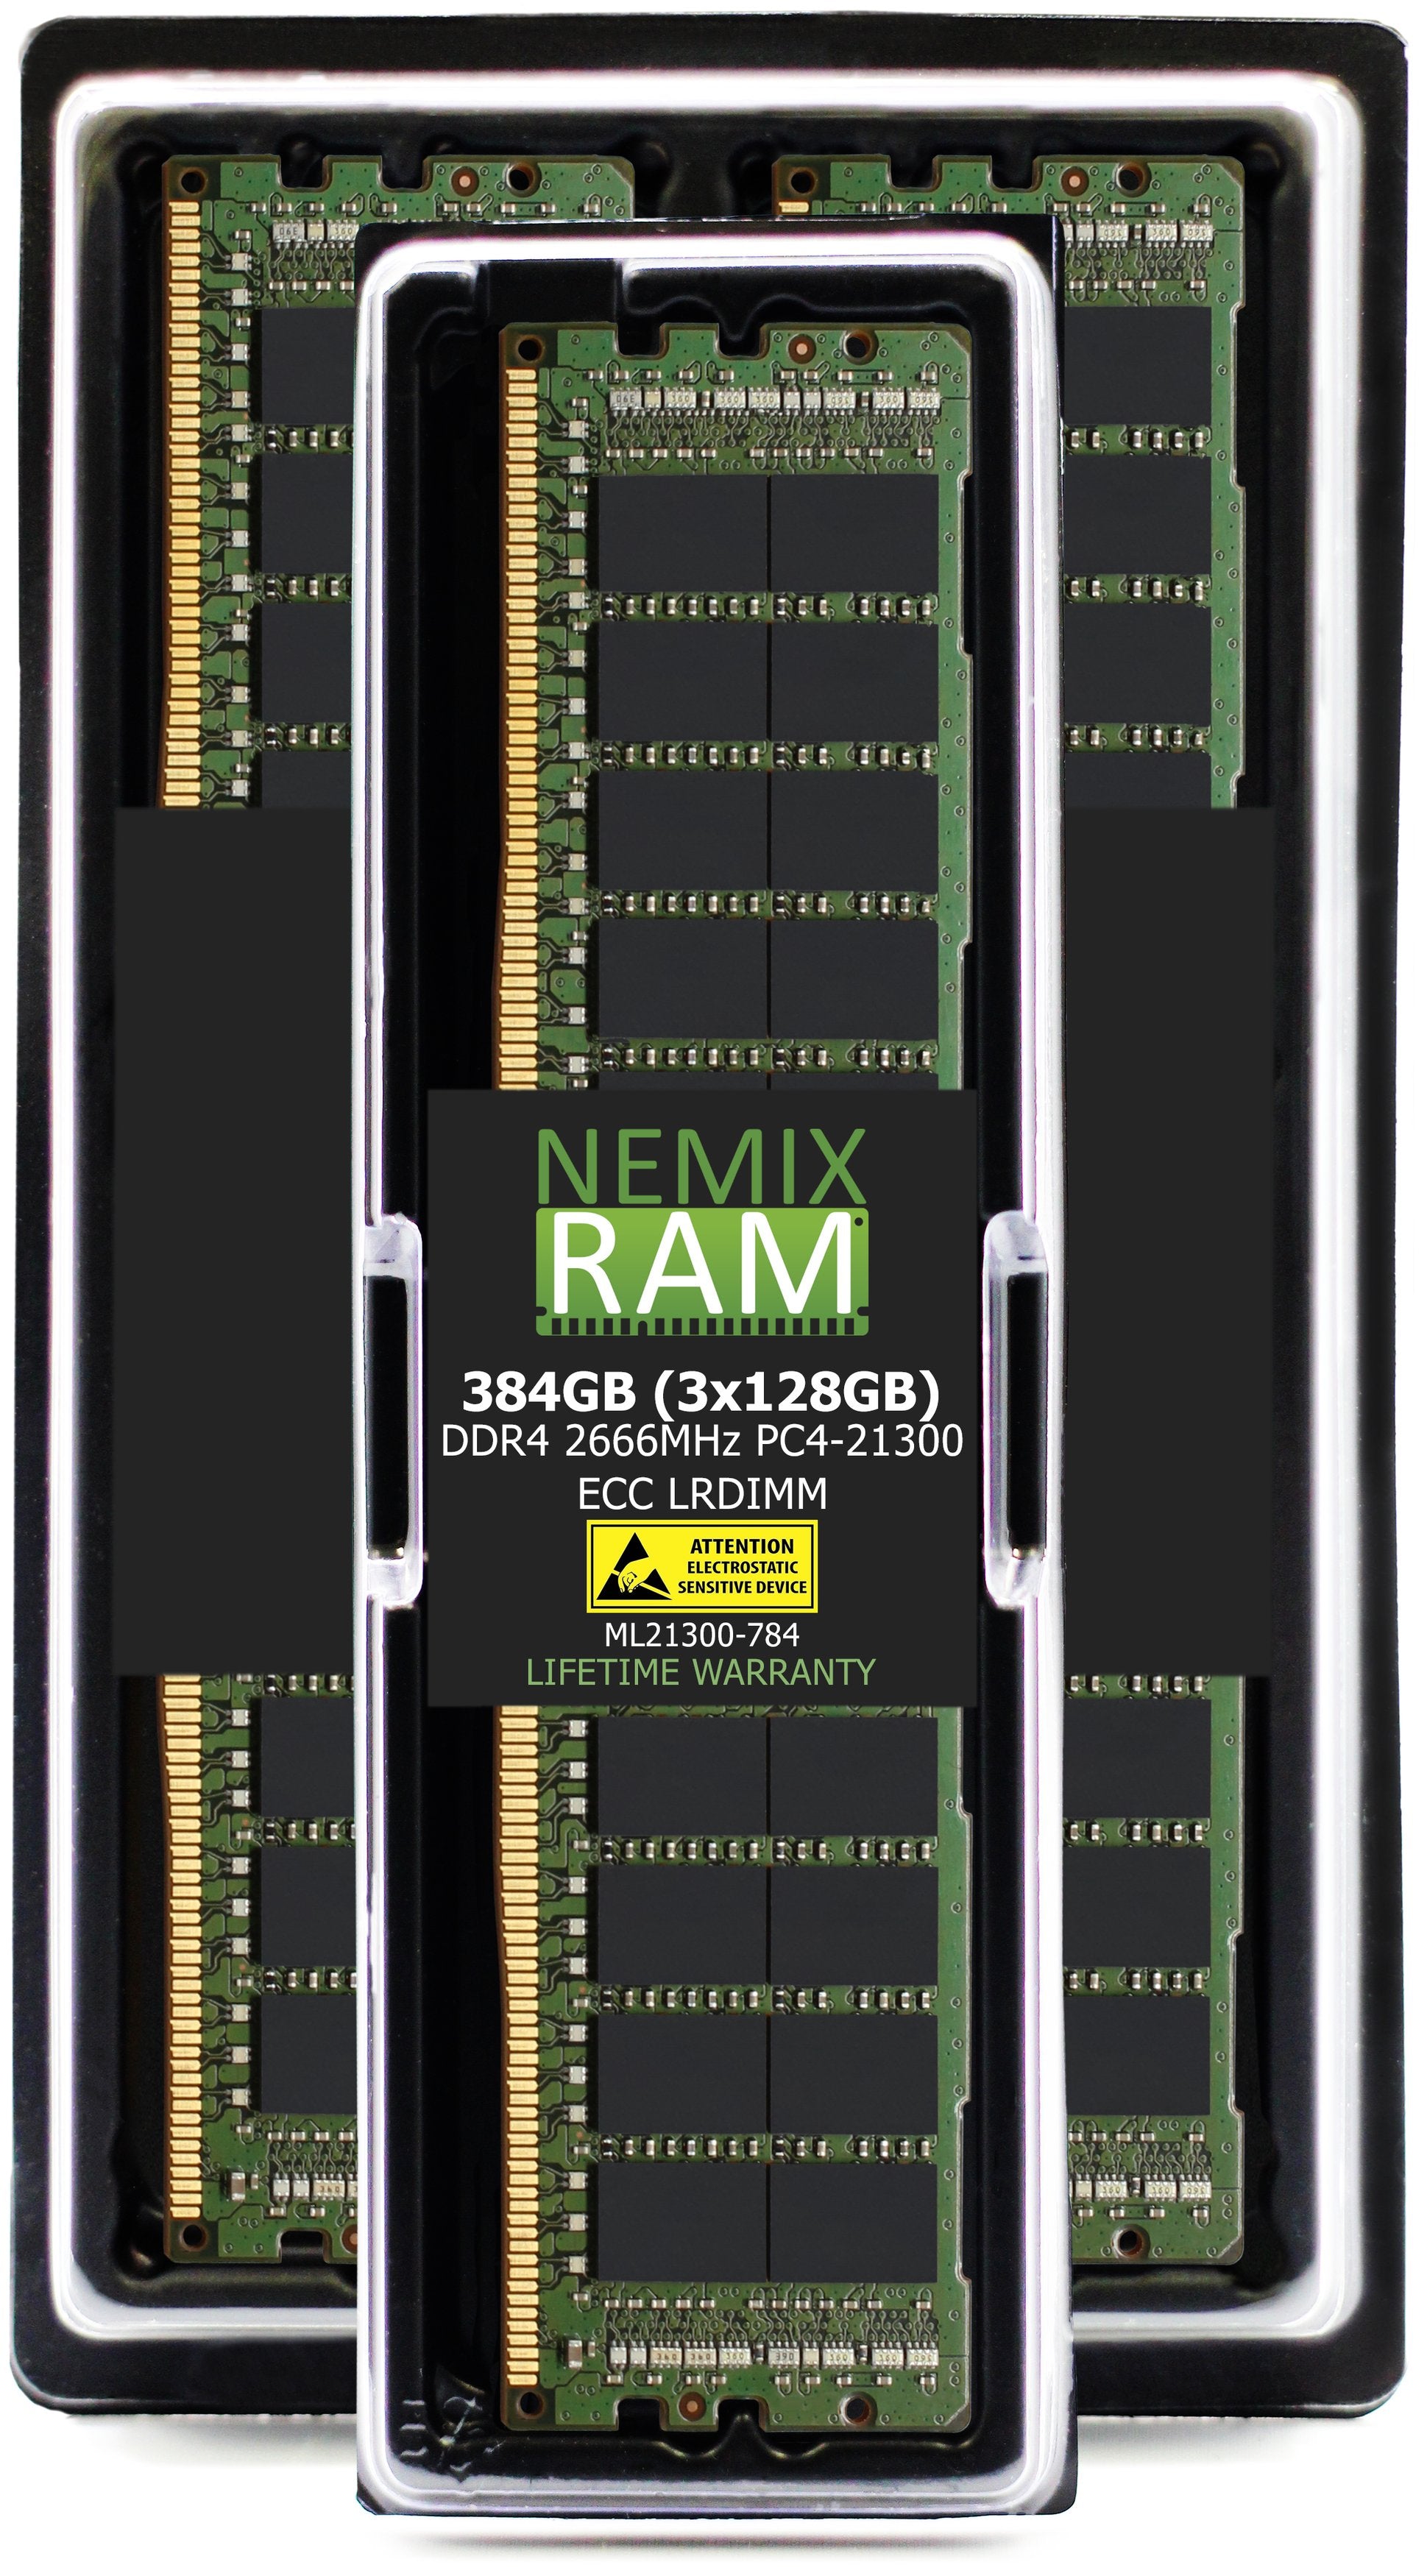 DDR4 2666MHZ PC4-21300 for Apple iMac Pro 2017 1,1